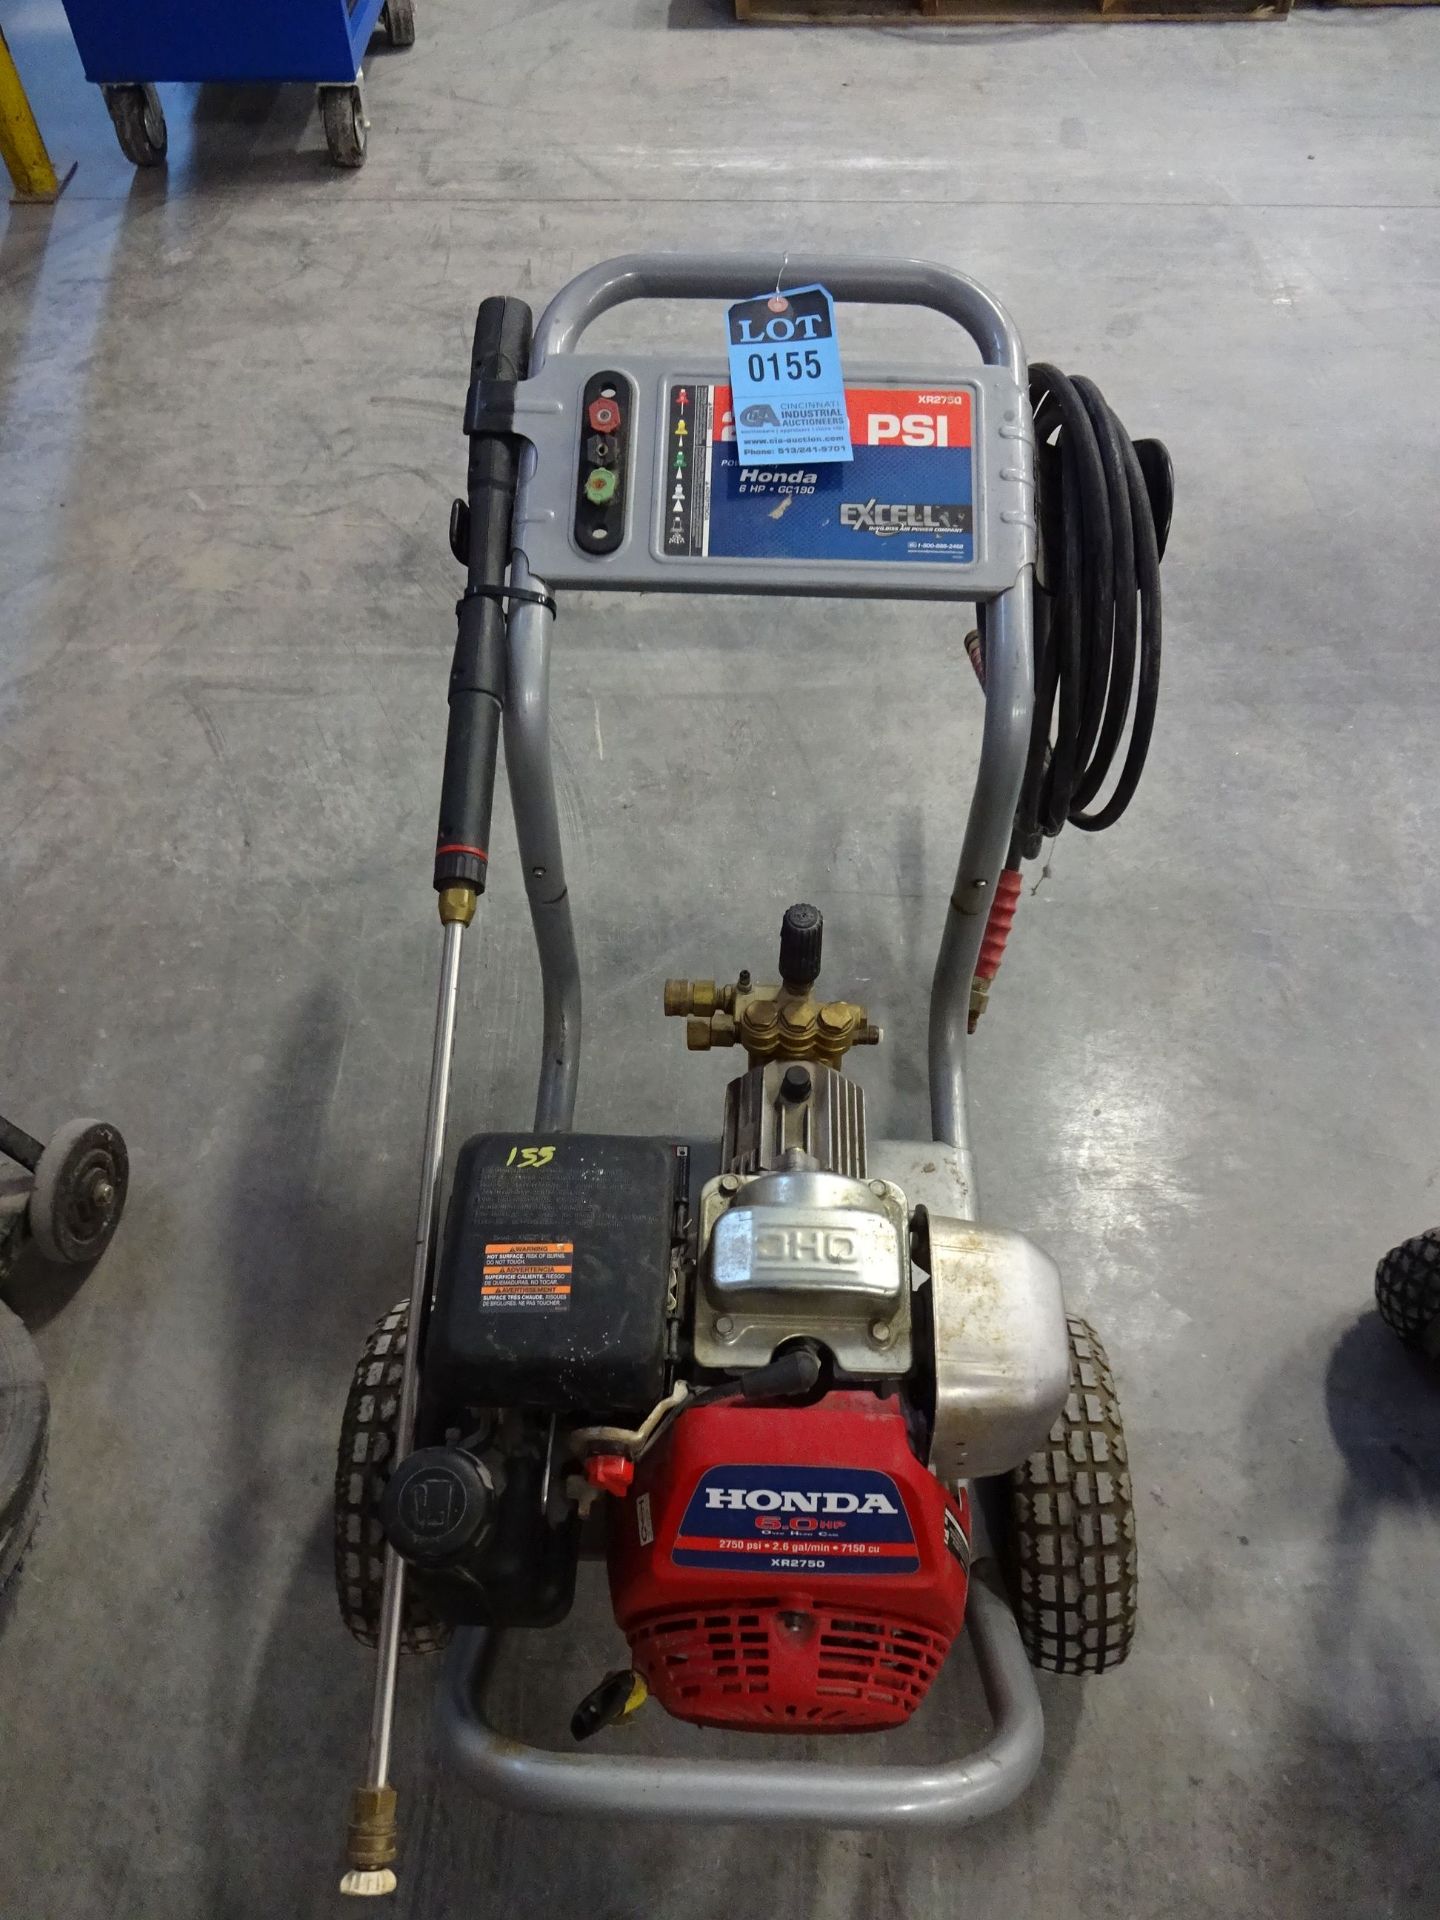 2,750 PSI EXCELL MODEL X52750 6 HP HONDA GAS PORTABLE PRESSURE WASHER